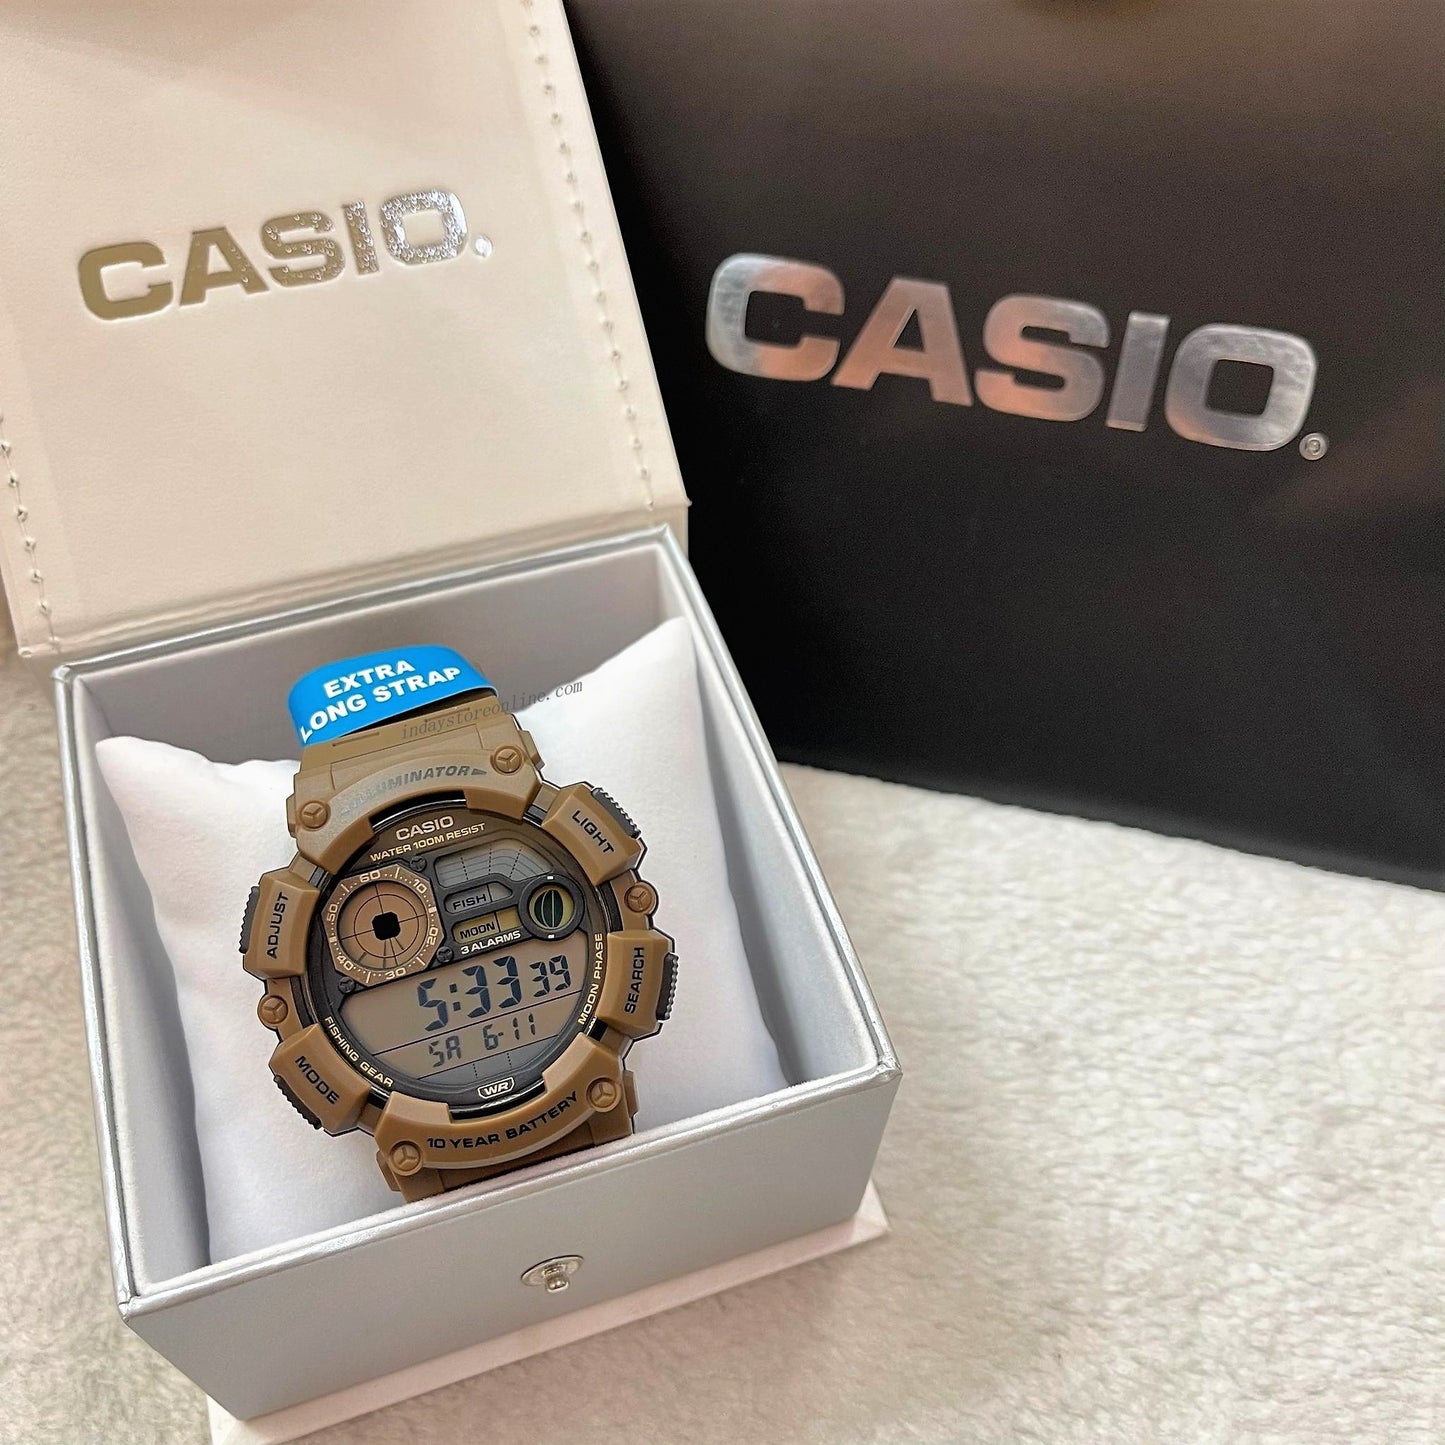 Casio Digital Men's Watch WS-1500H-5A Digital Resin Band Resin Glass Battery Life: 10 Years